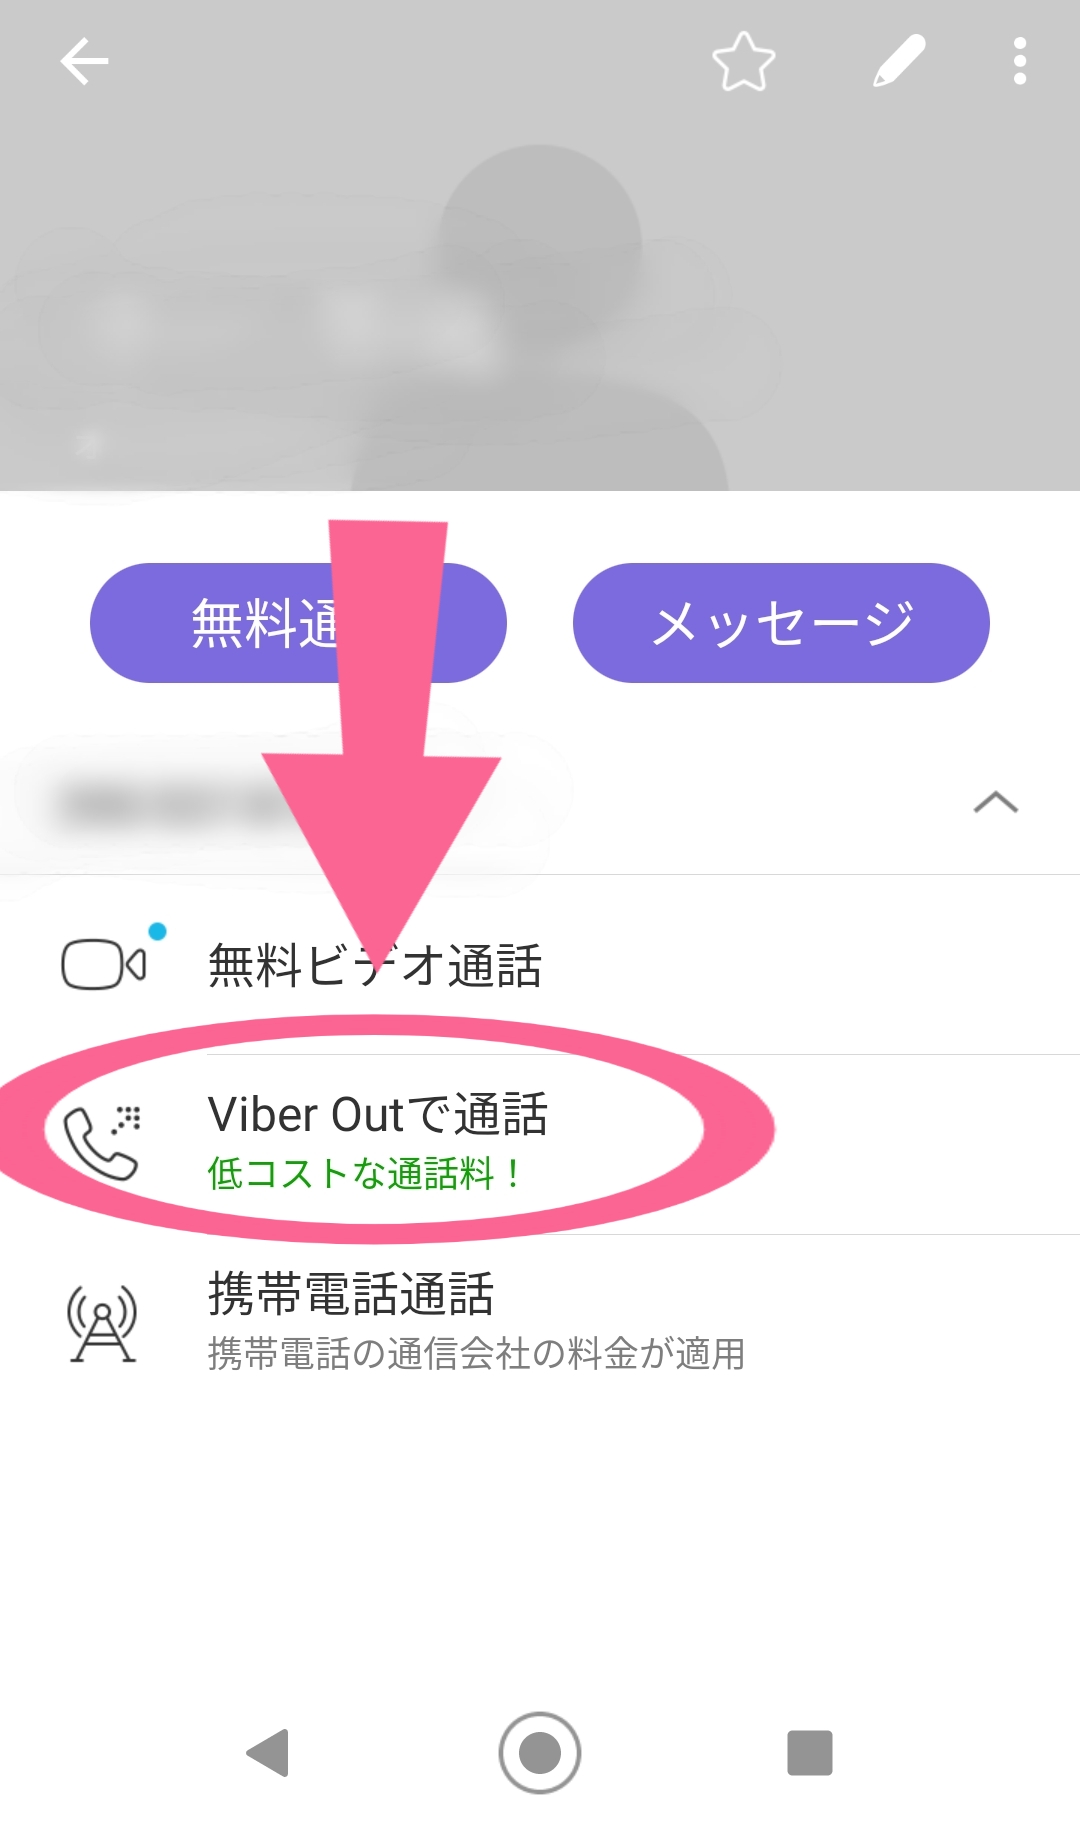 Viber Outで通話する　発信　タップ